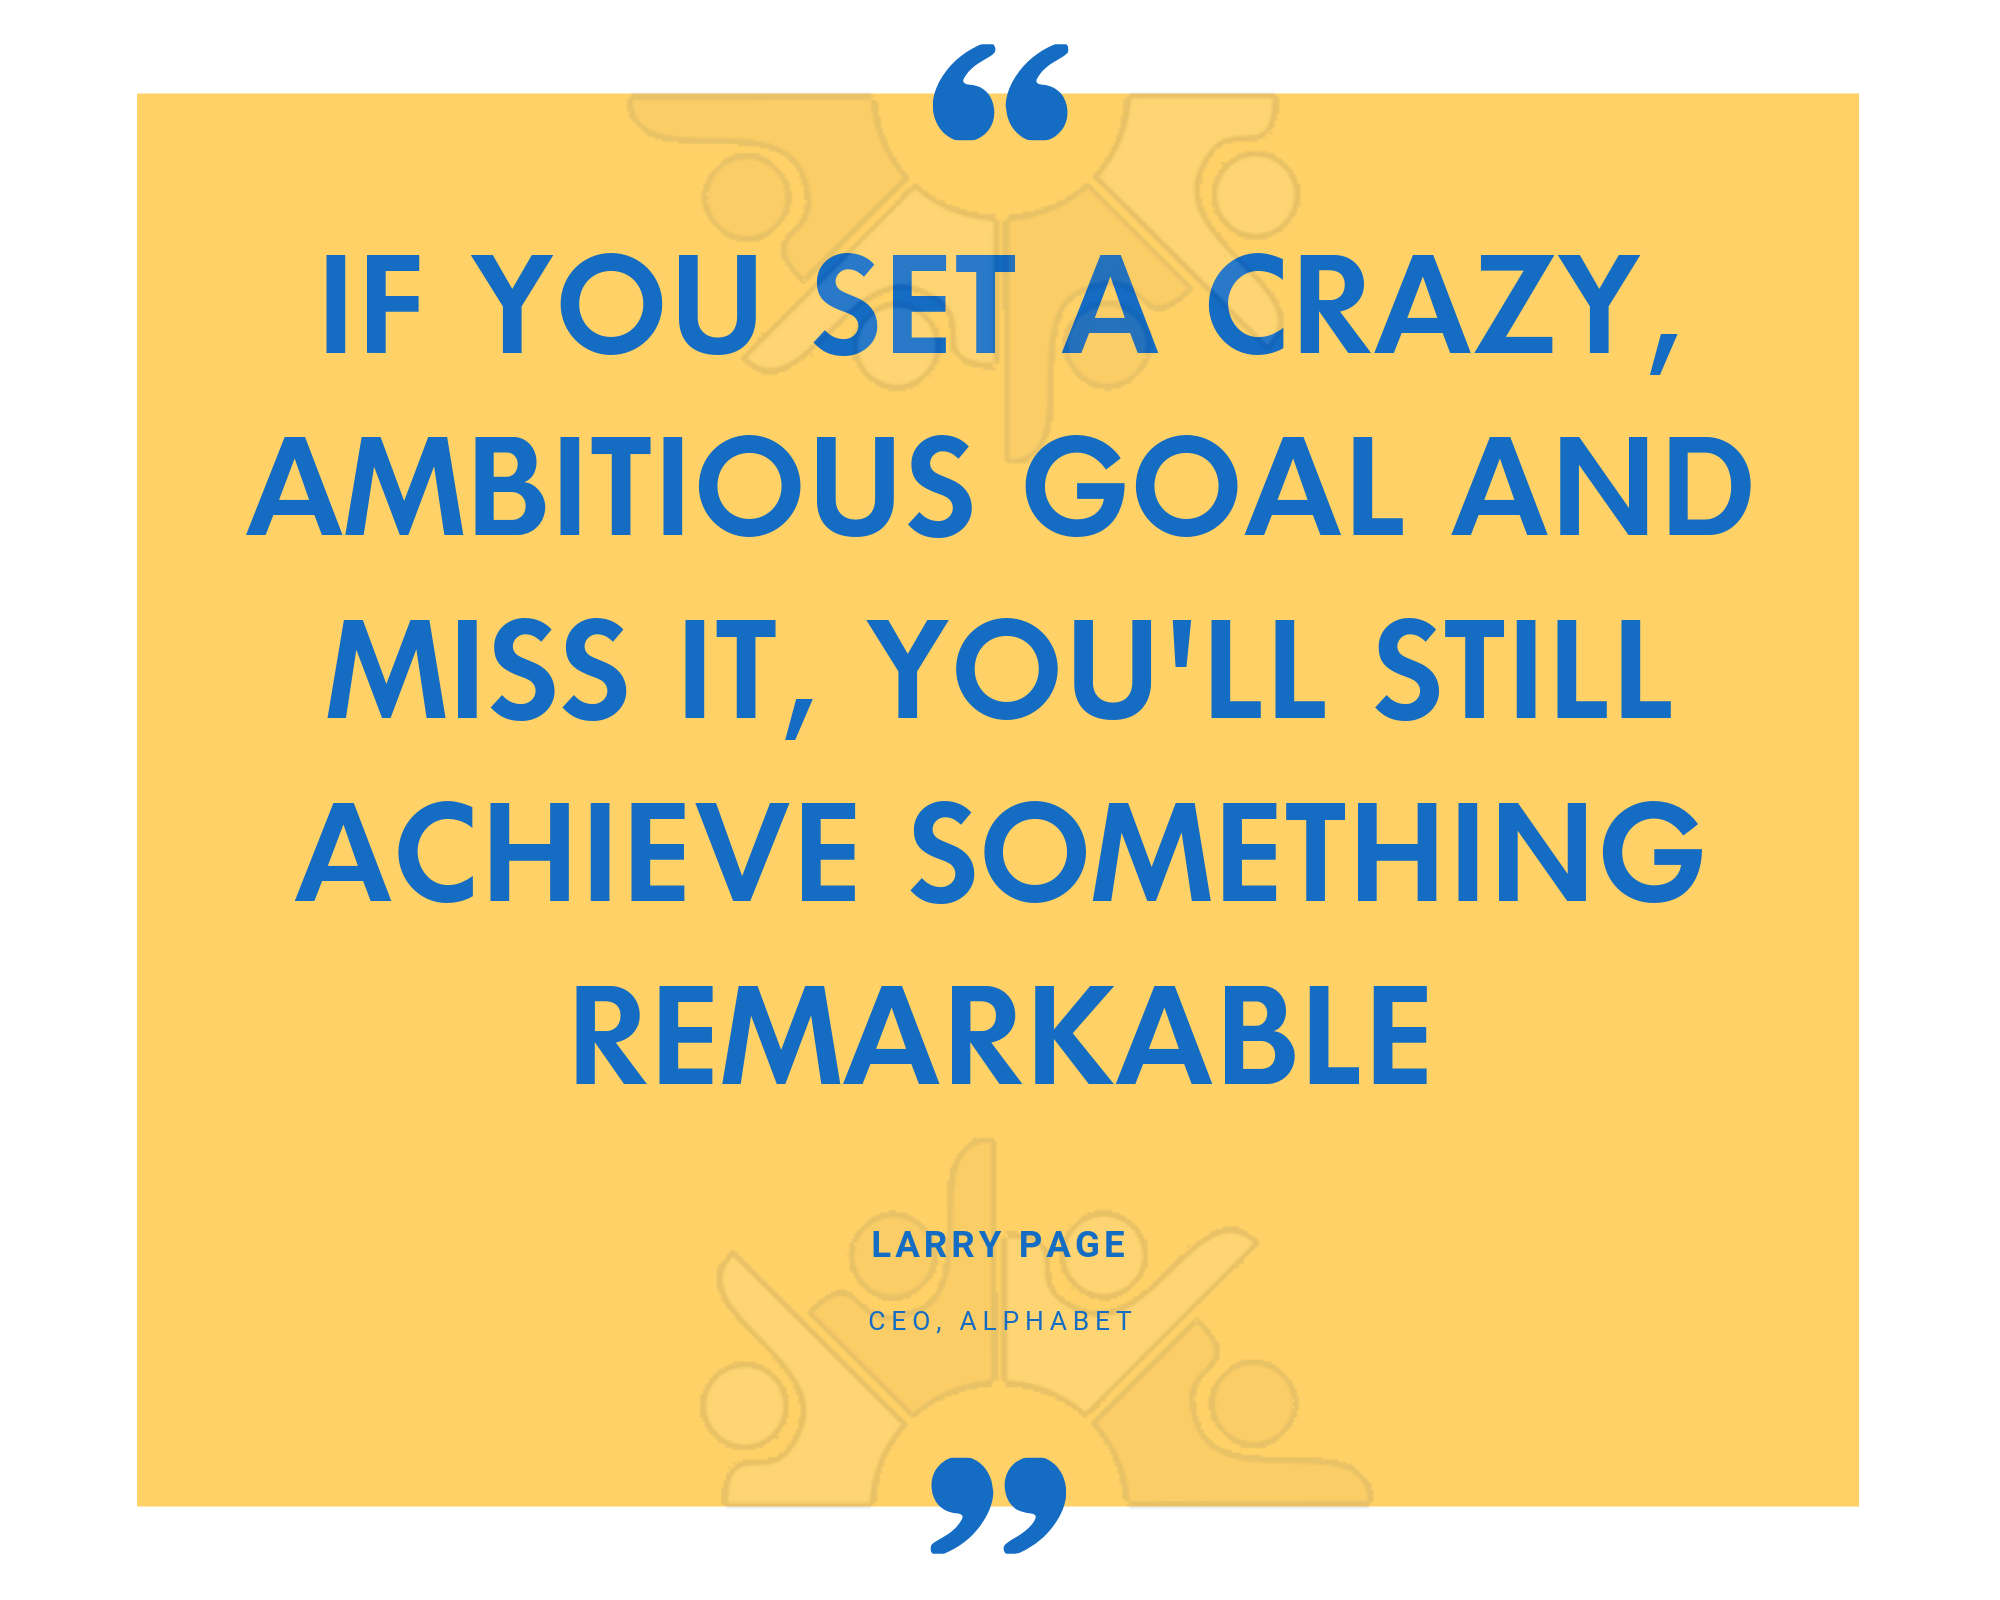 If you set a crazy, ambitious goal and miss it, youll still achieve something remarkable